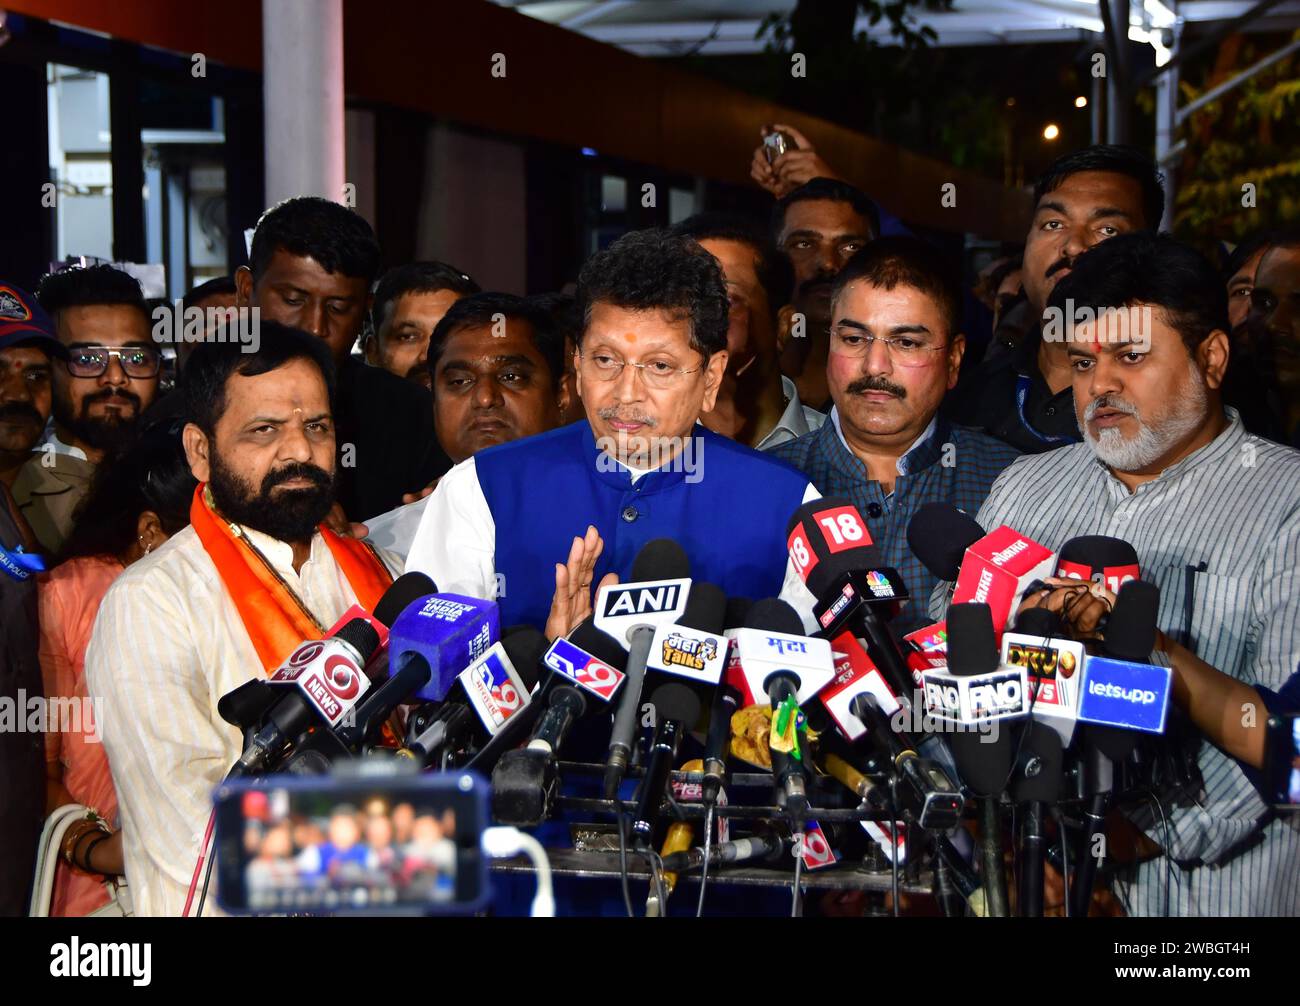 MUMBAI, INDIA - JANUARY 10: Shiv Sena (Shinde faction) MLAs Deepak Kesarkar, Bharat Gogawale, and Uday Samant addressing the media after the verdict in the MLA disqualification case came in their favour, at Vidhan Bhavan on January 10, 2024 in Mumbai, India. The Maharashtra Legislative Assembly Speaker Rahul Narwekar today held that Eknath Shinde led faction was the real Shiv Sena when the rival faction emerged within the party on June 22, 2022. He has refused to disqualify any member from both the factions, led by Shinde and Uddhav Thackeray. Both the factions had filed 34 petitions against Stock Photo